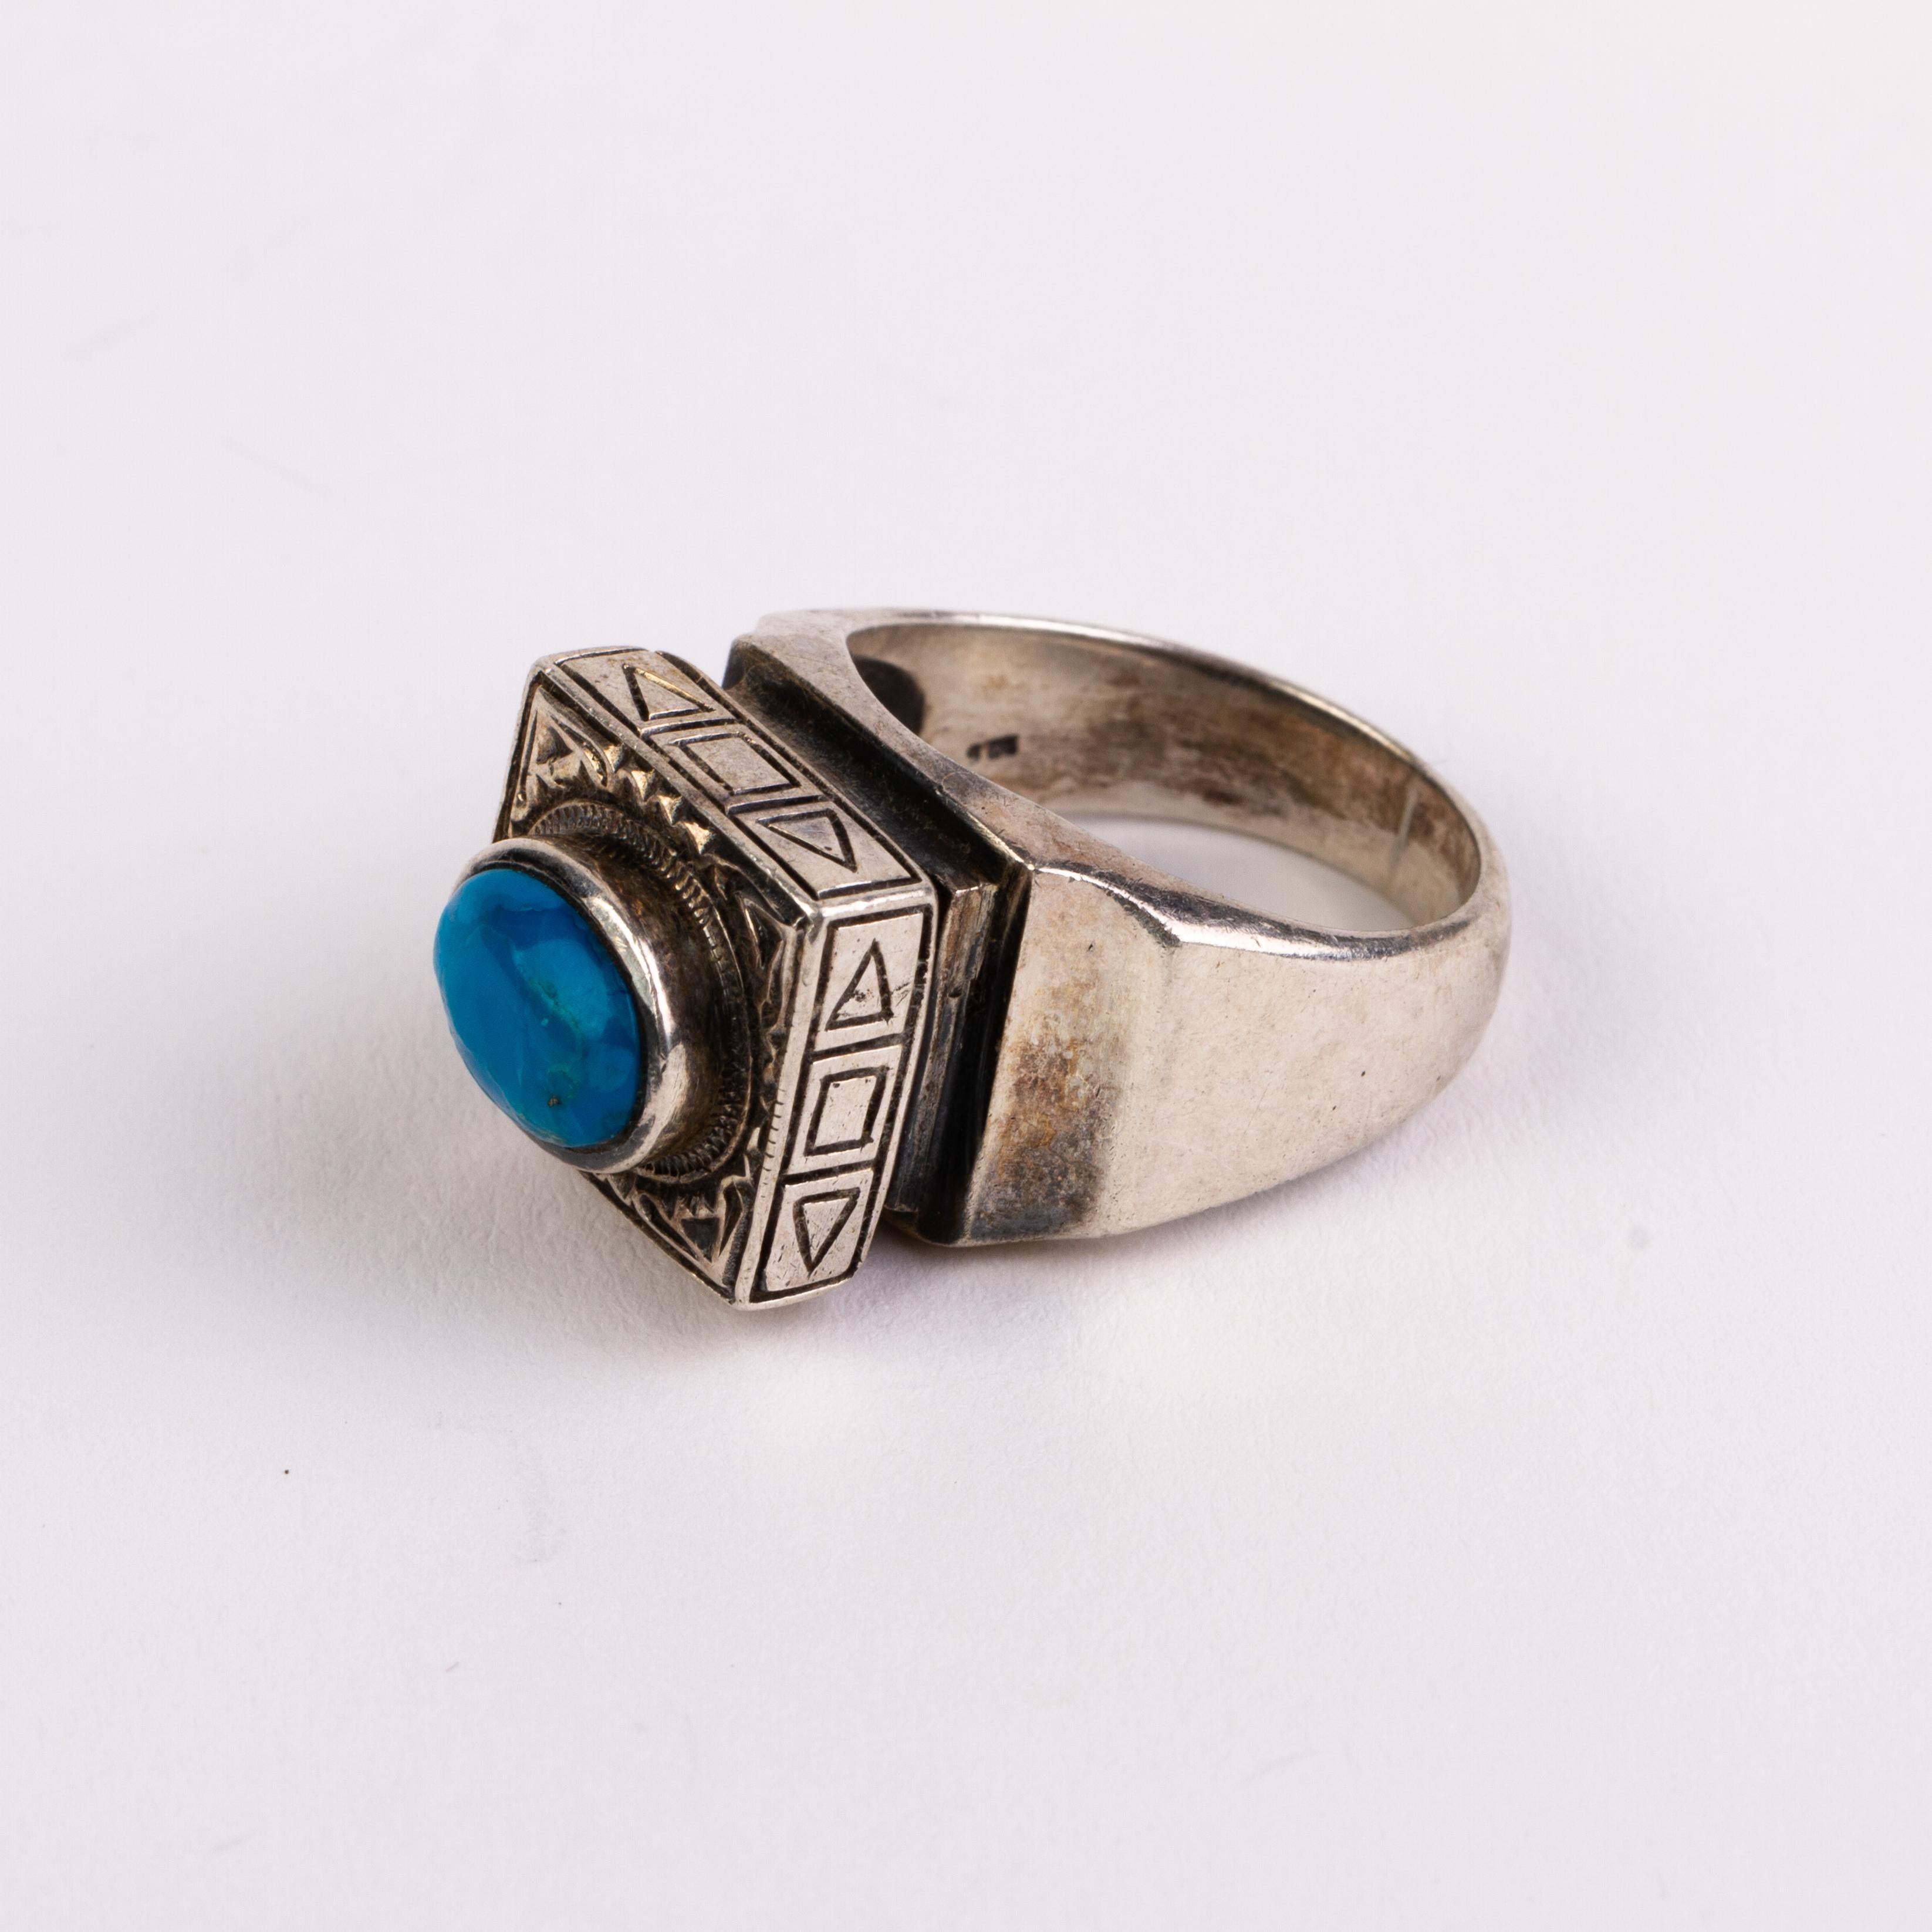 Navajo Native American Natural Turquoise Sterling Silver Ring 
Good condition 
From a private collection.
Free international shipping.